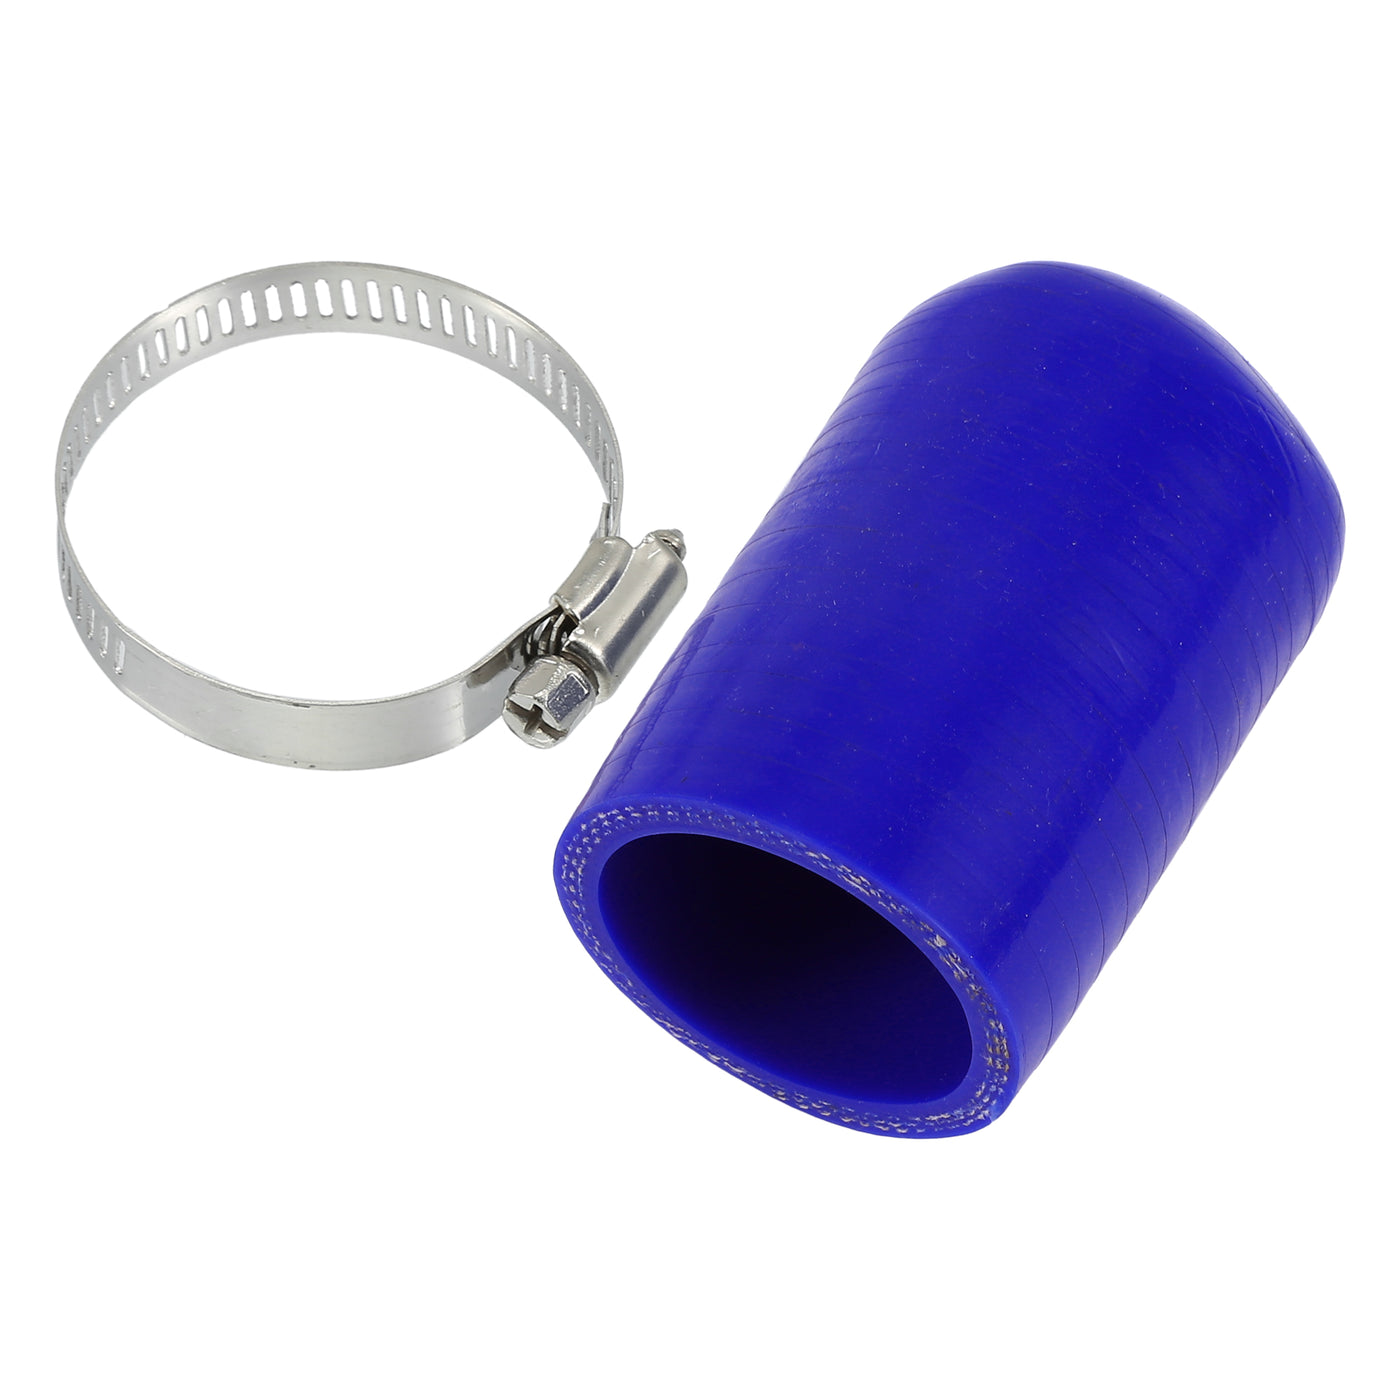 X AUTOHAUX 1 Pcs 60mm Length 40mm/1.57" ID Blue Car Silicone Rubber Hose End Cap with Clamp Silicone Reinforced Blanking Cap for Bypass Tube Universal